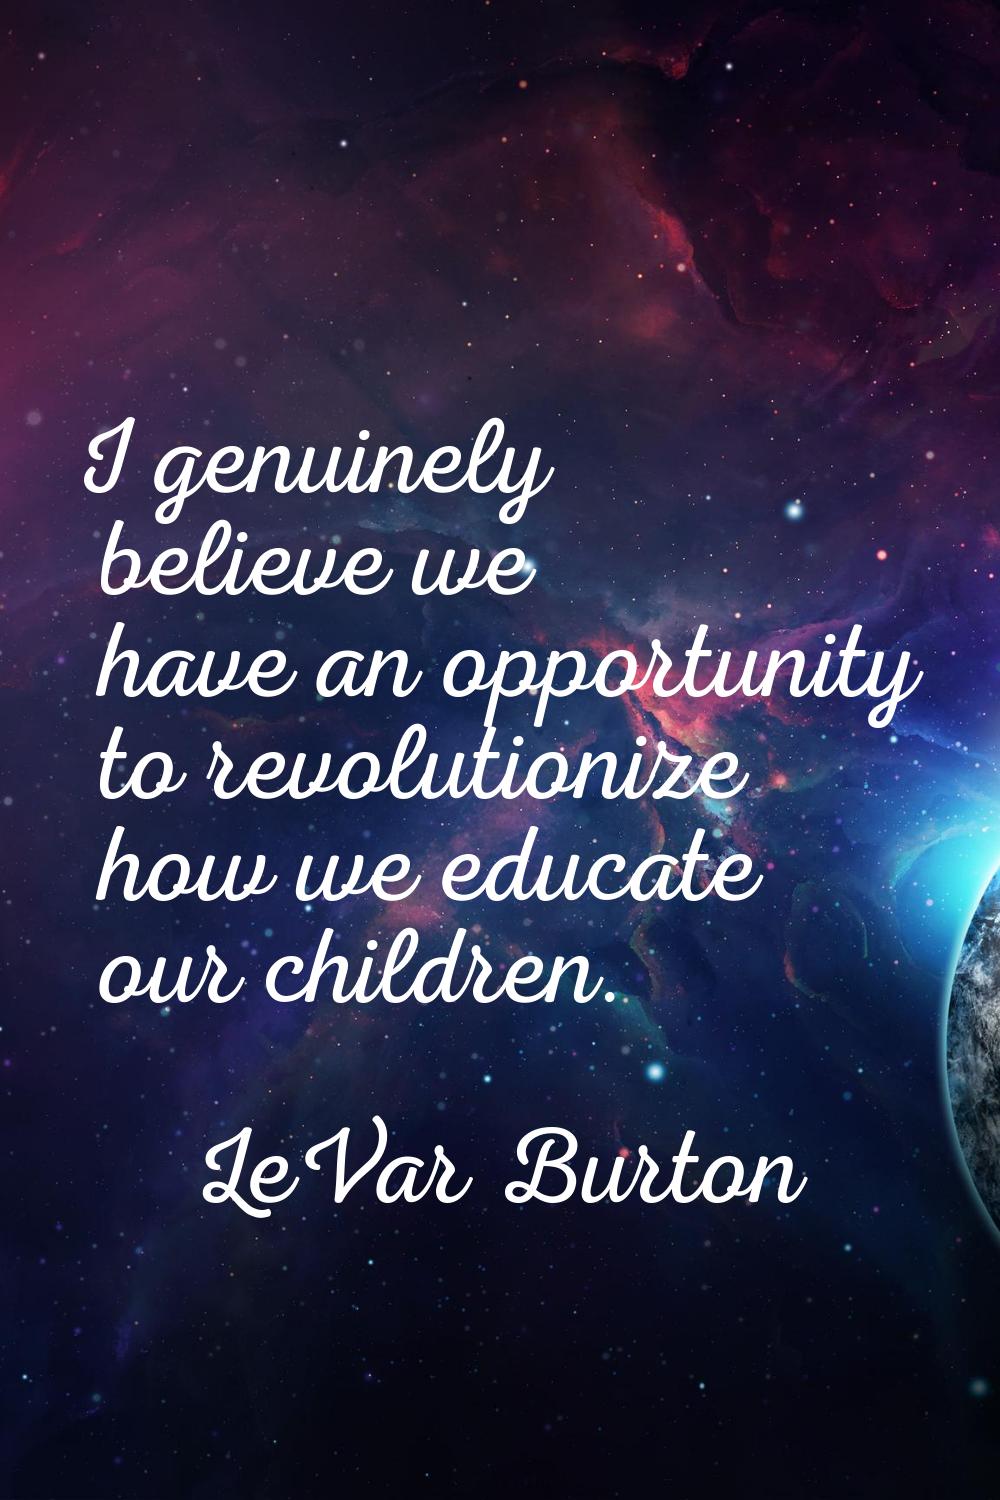 I genuinely believe we have an opportunity to revolutionize how we educate our children.